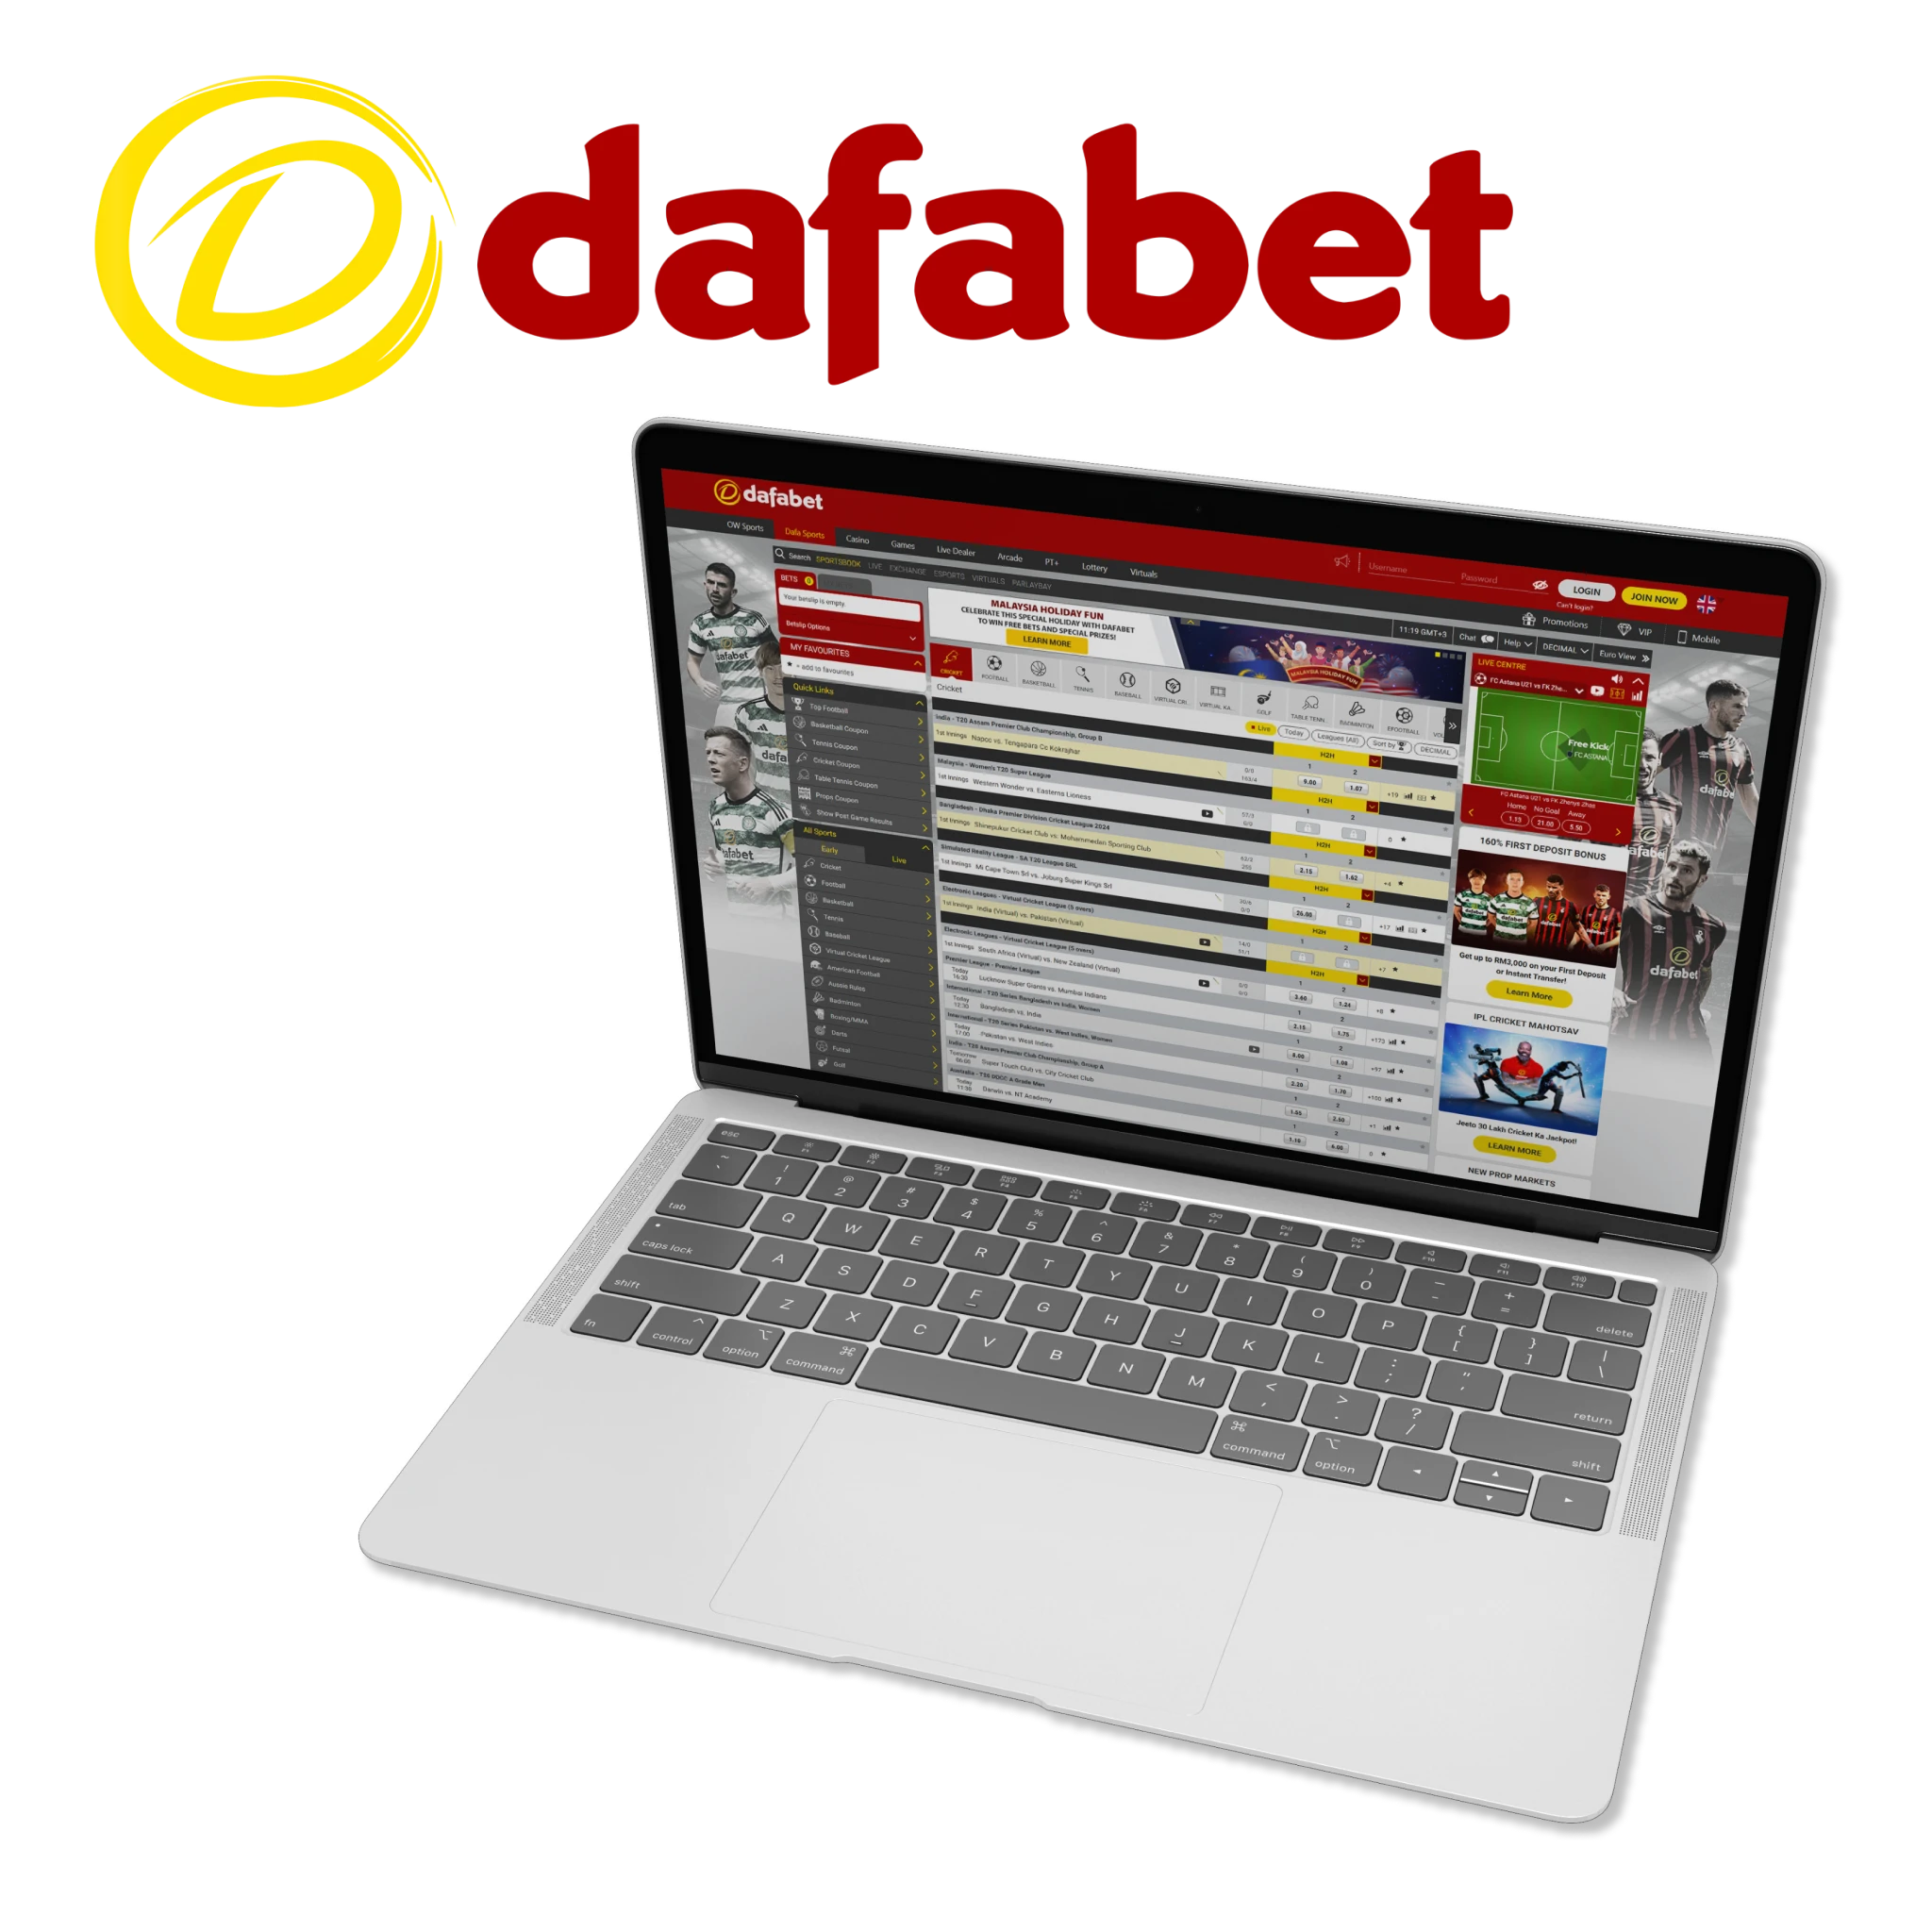 If you are ready to bet on cricket and win regularly, you should go through the registration process at Dafabet right now.